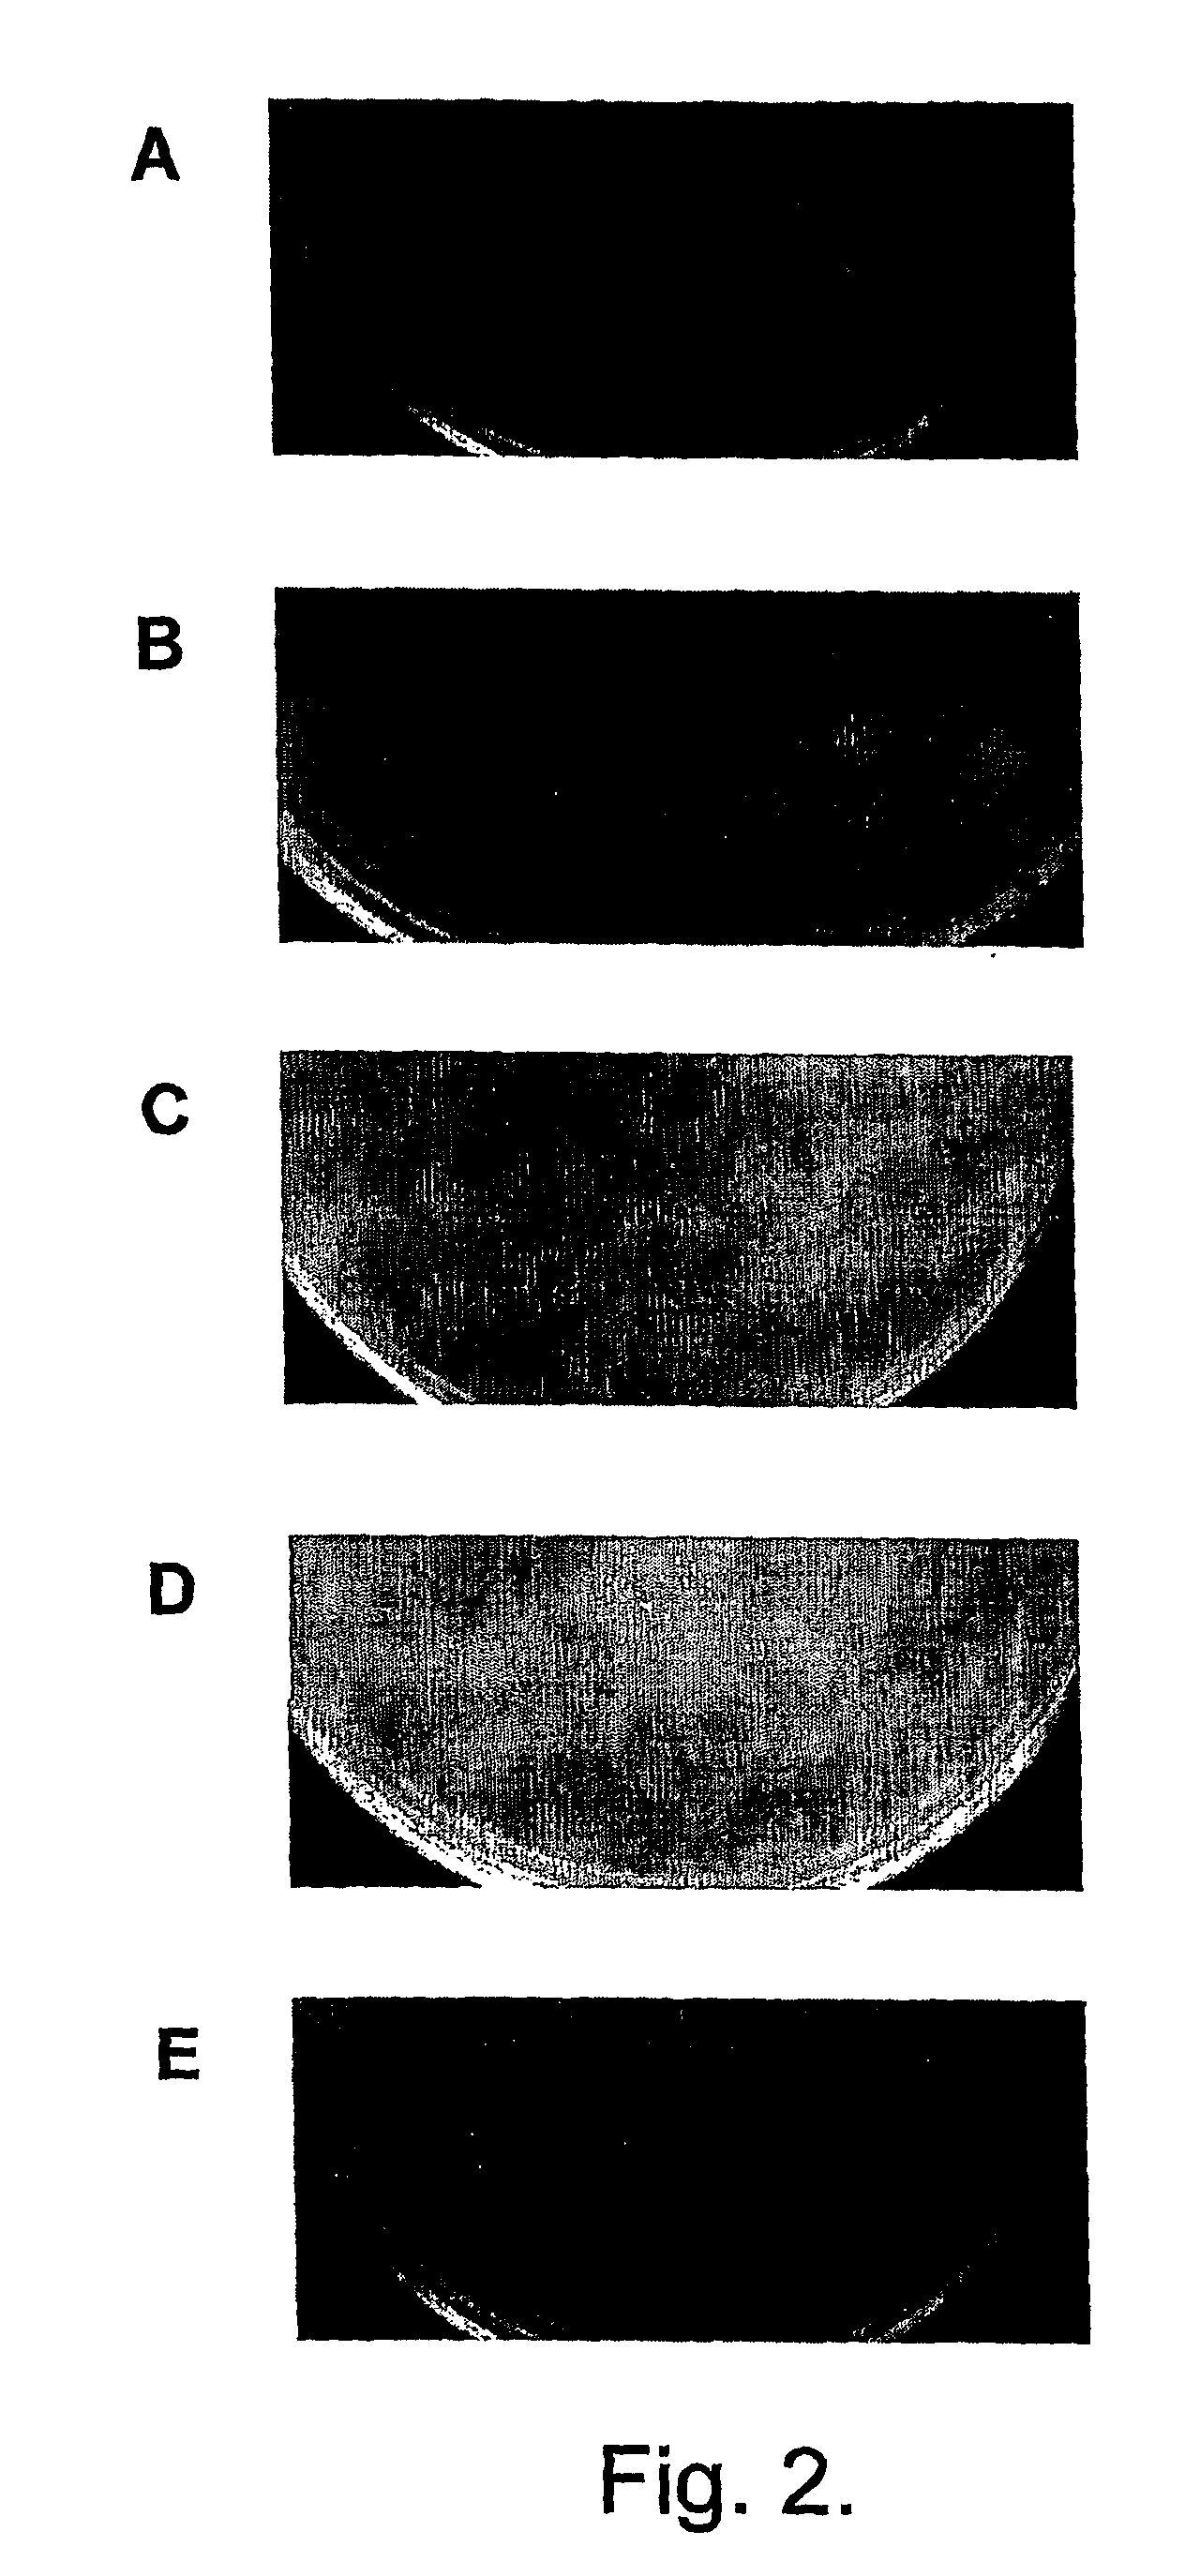 Bacteriophage-containing therapeutic agents